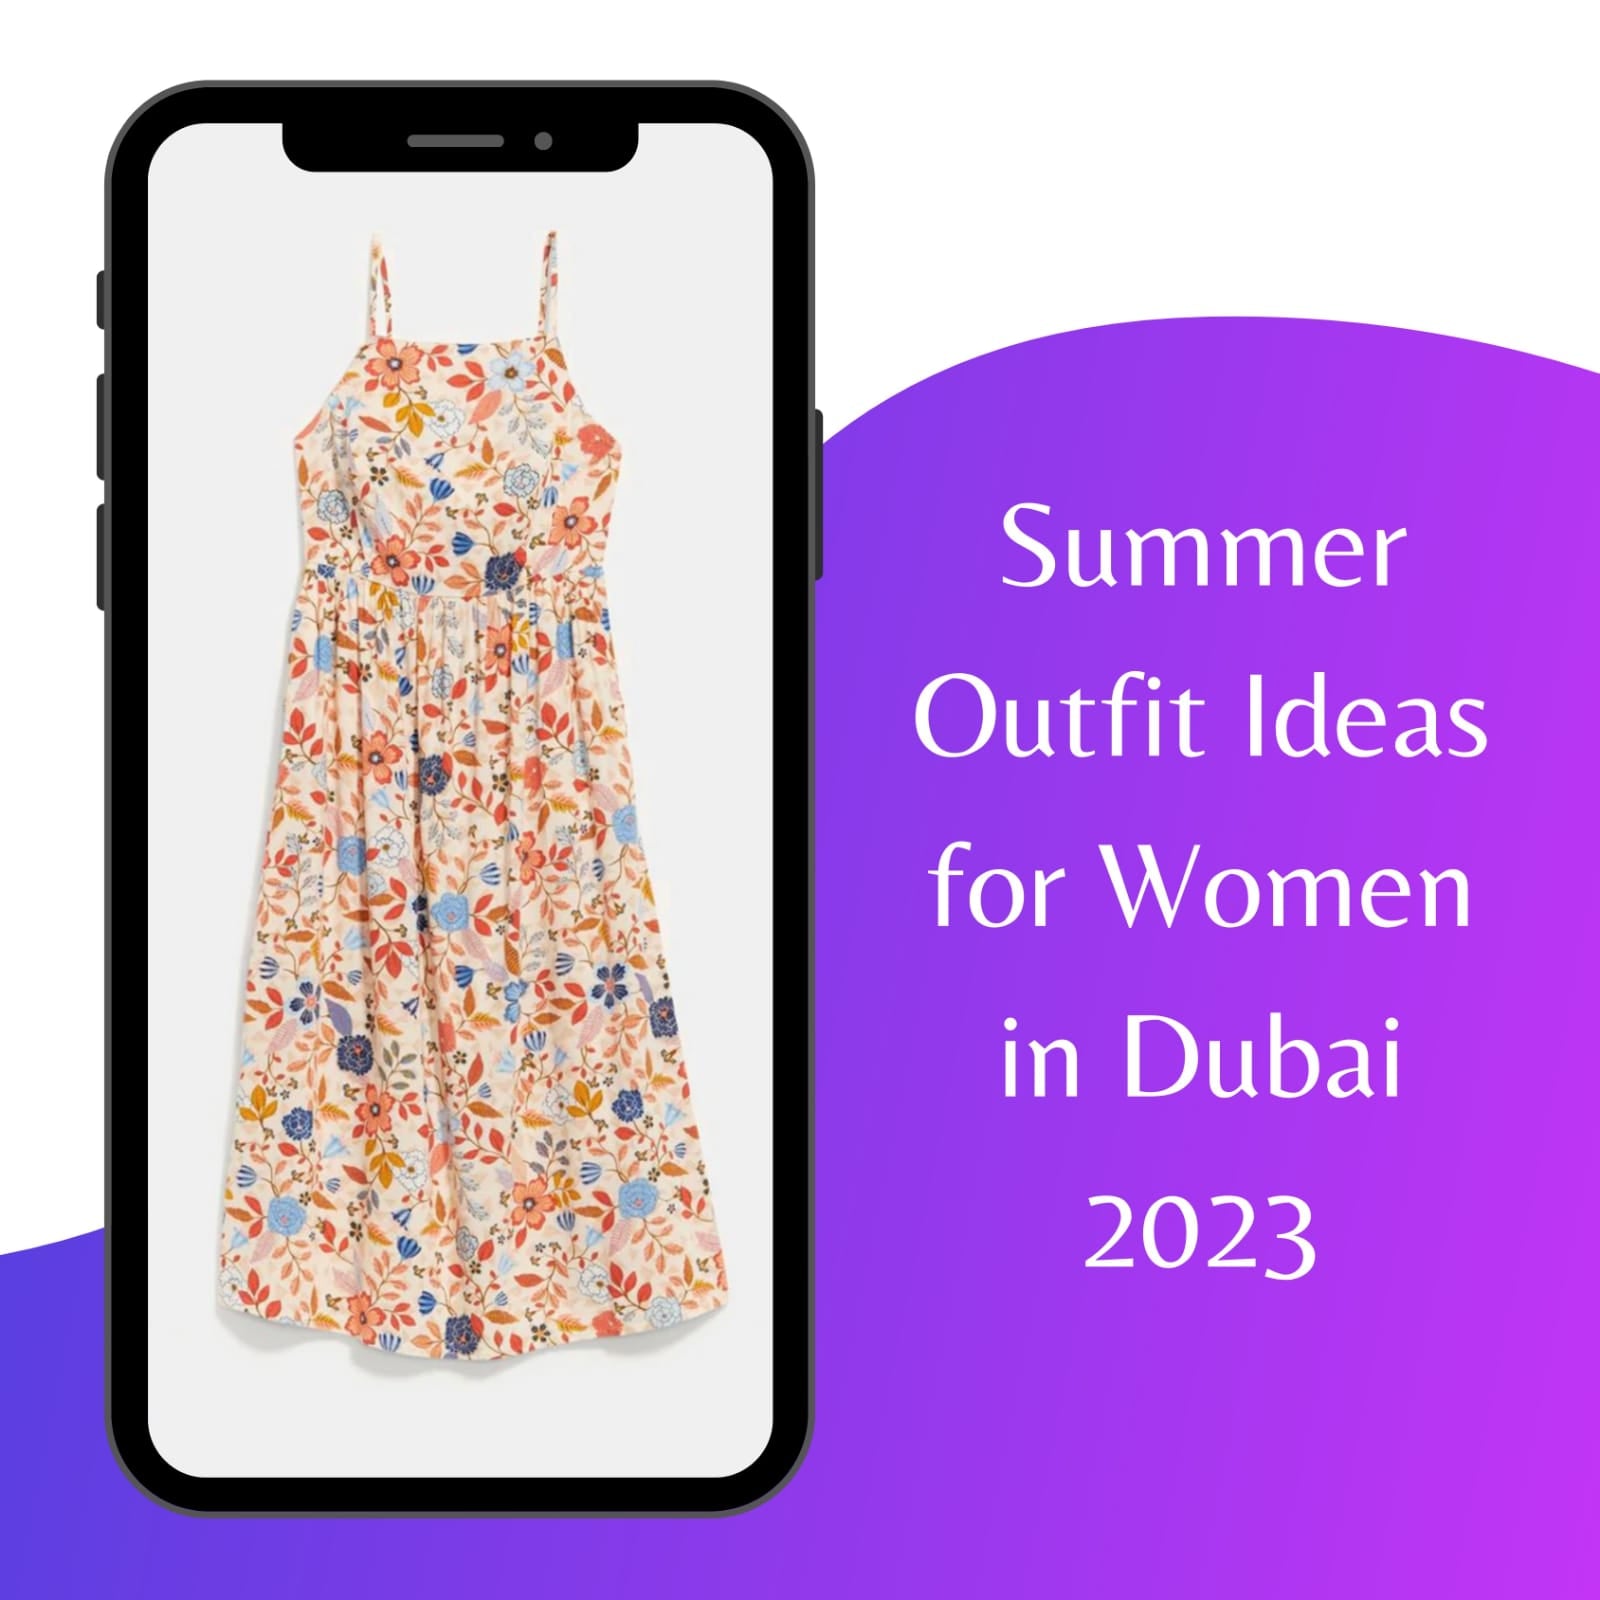 Summer Outfit Ideas for Women in Dubai 2023